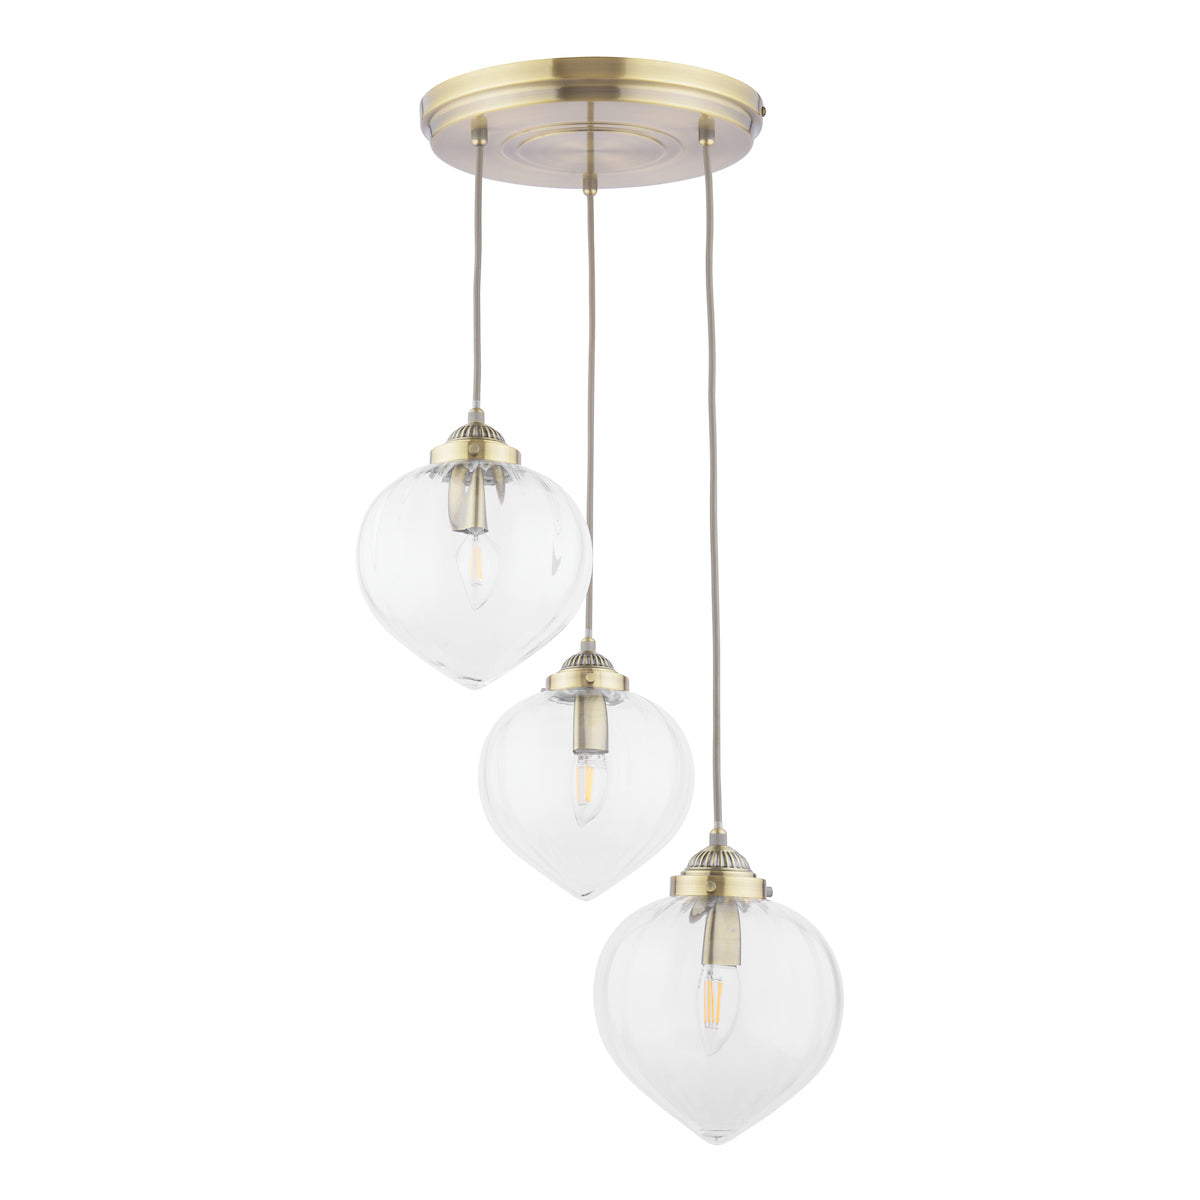 Laura Ashley Whitham 3 Light Cluster Pendant Antique Brass and Glass